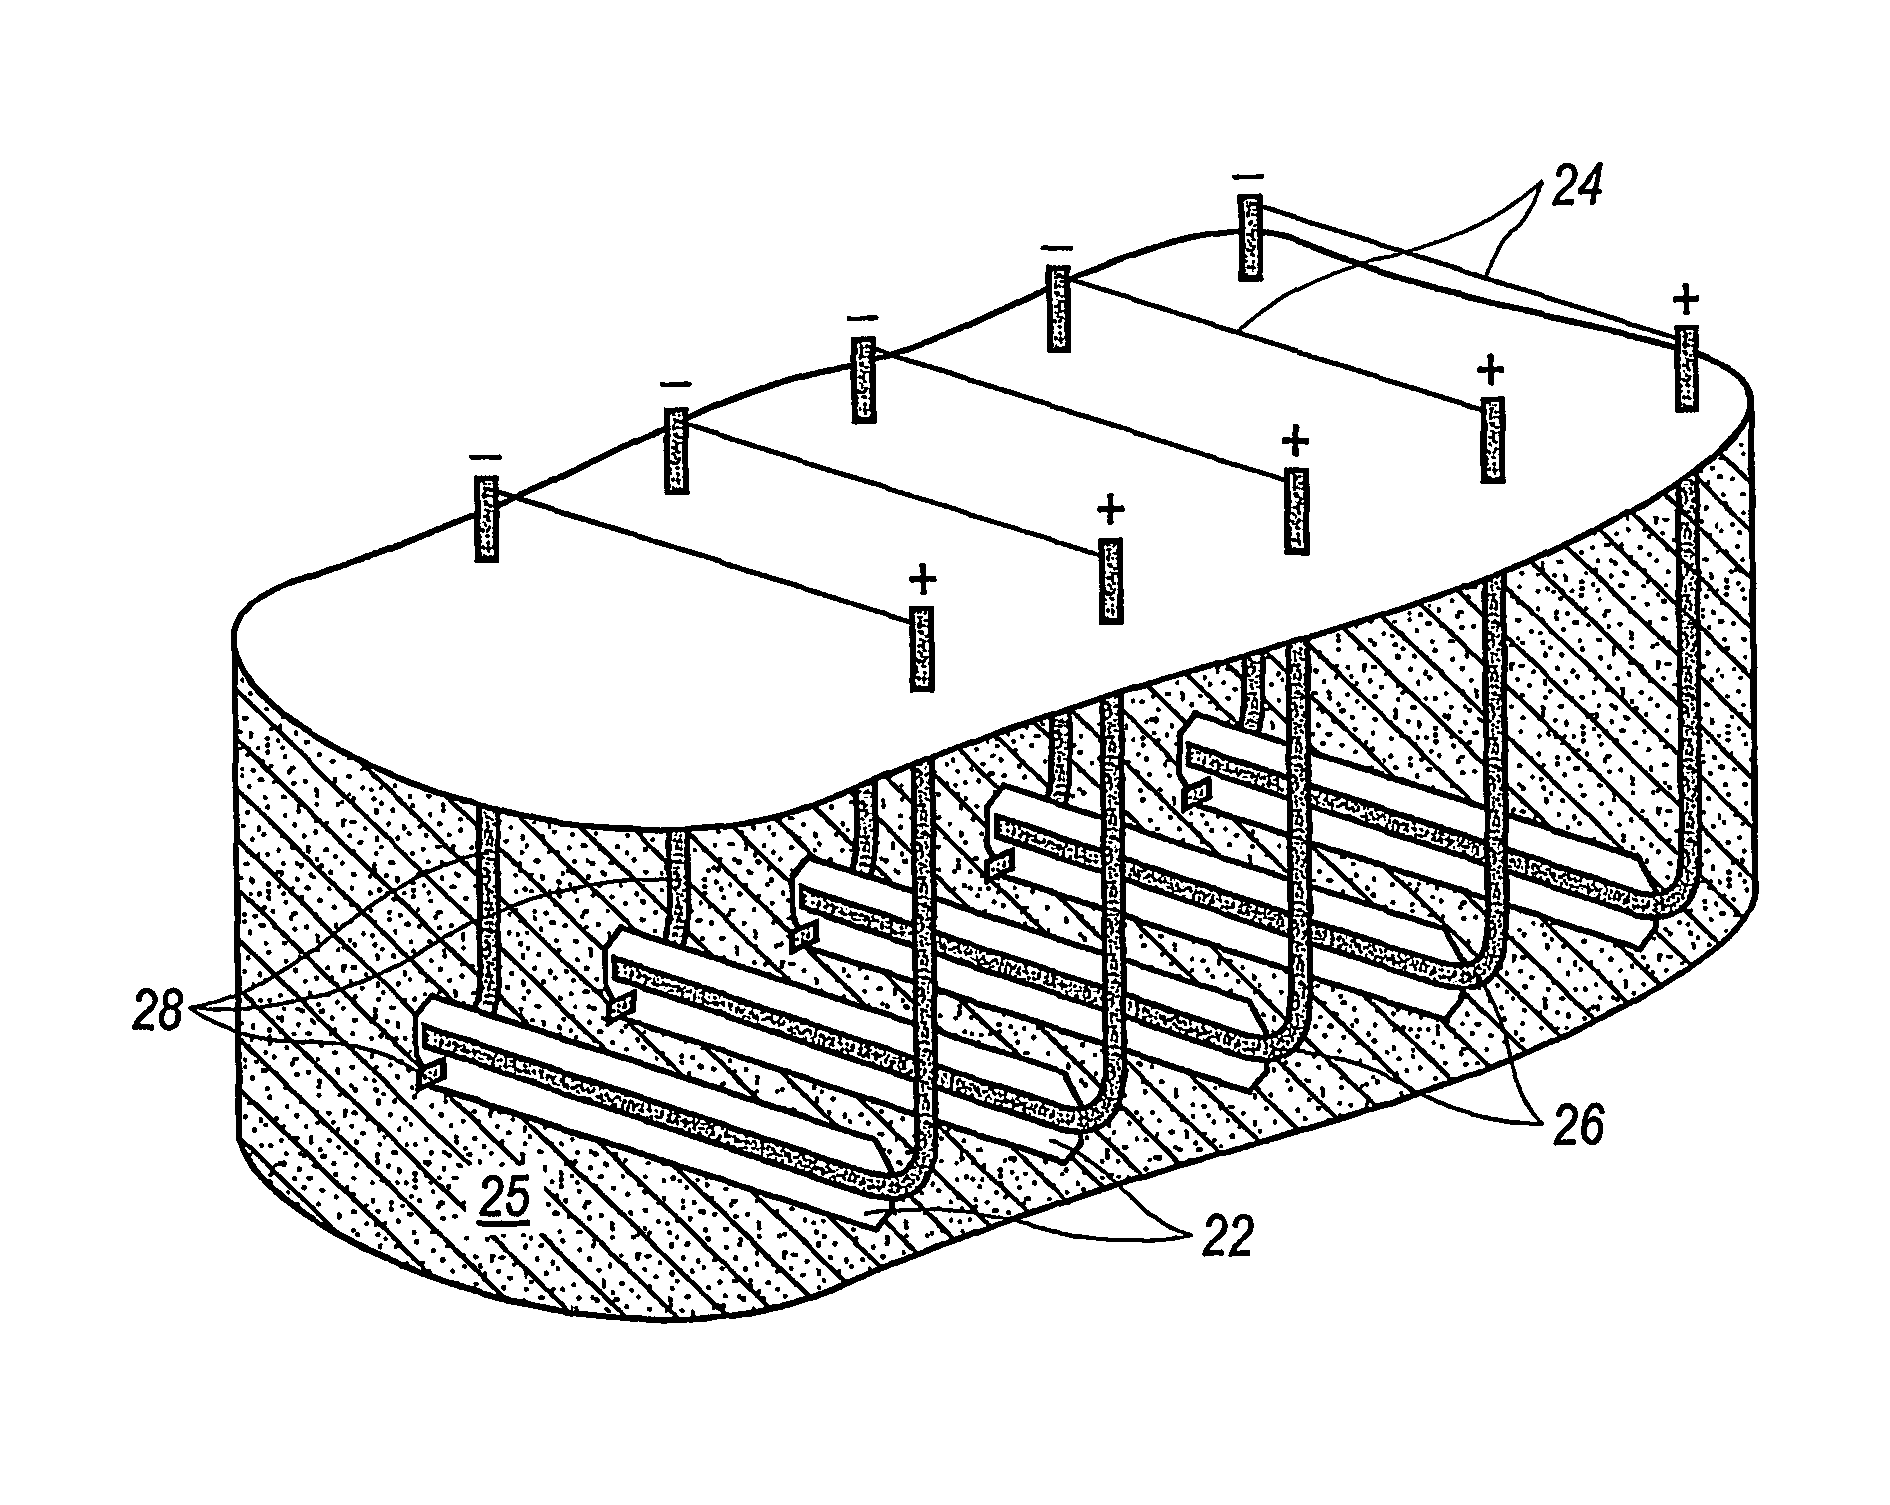 Methods of treating a subterranean formation to convert organic matter into producible hydrocarbons